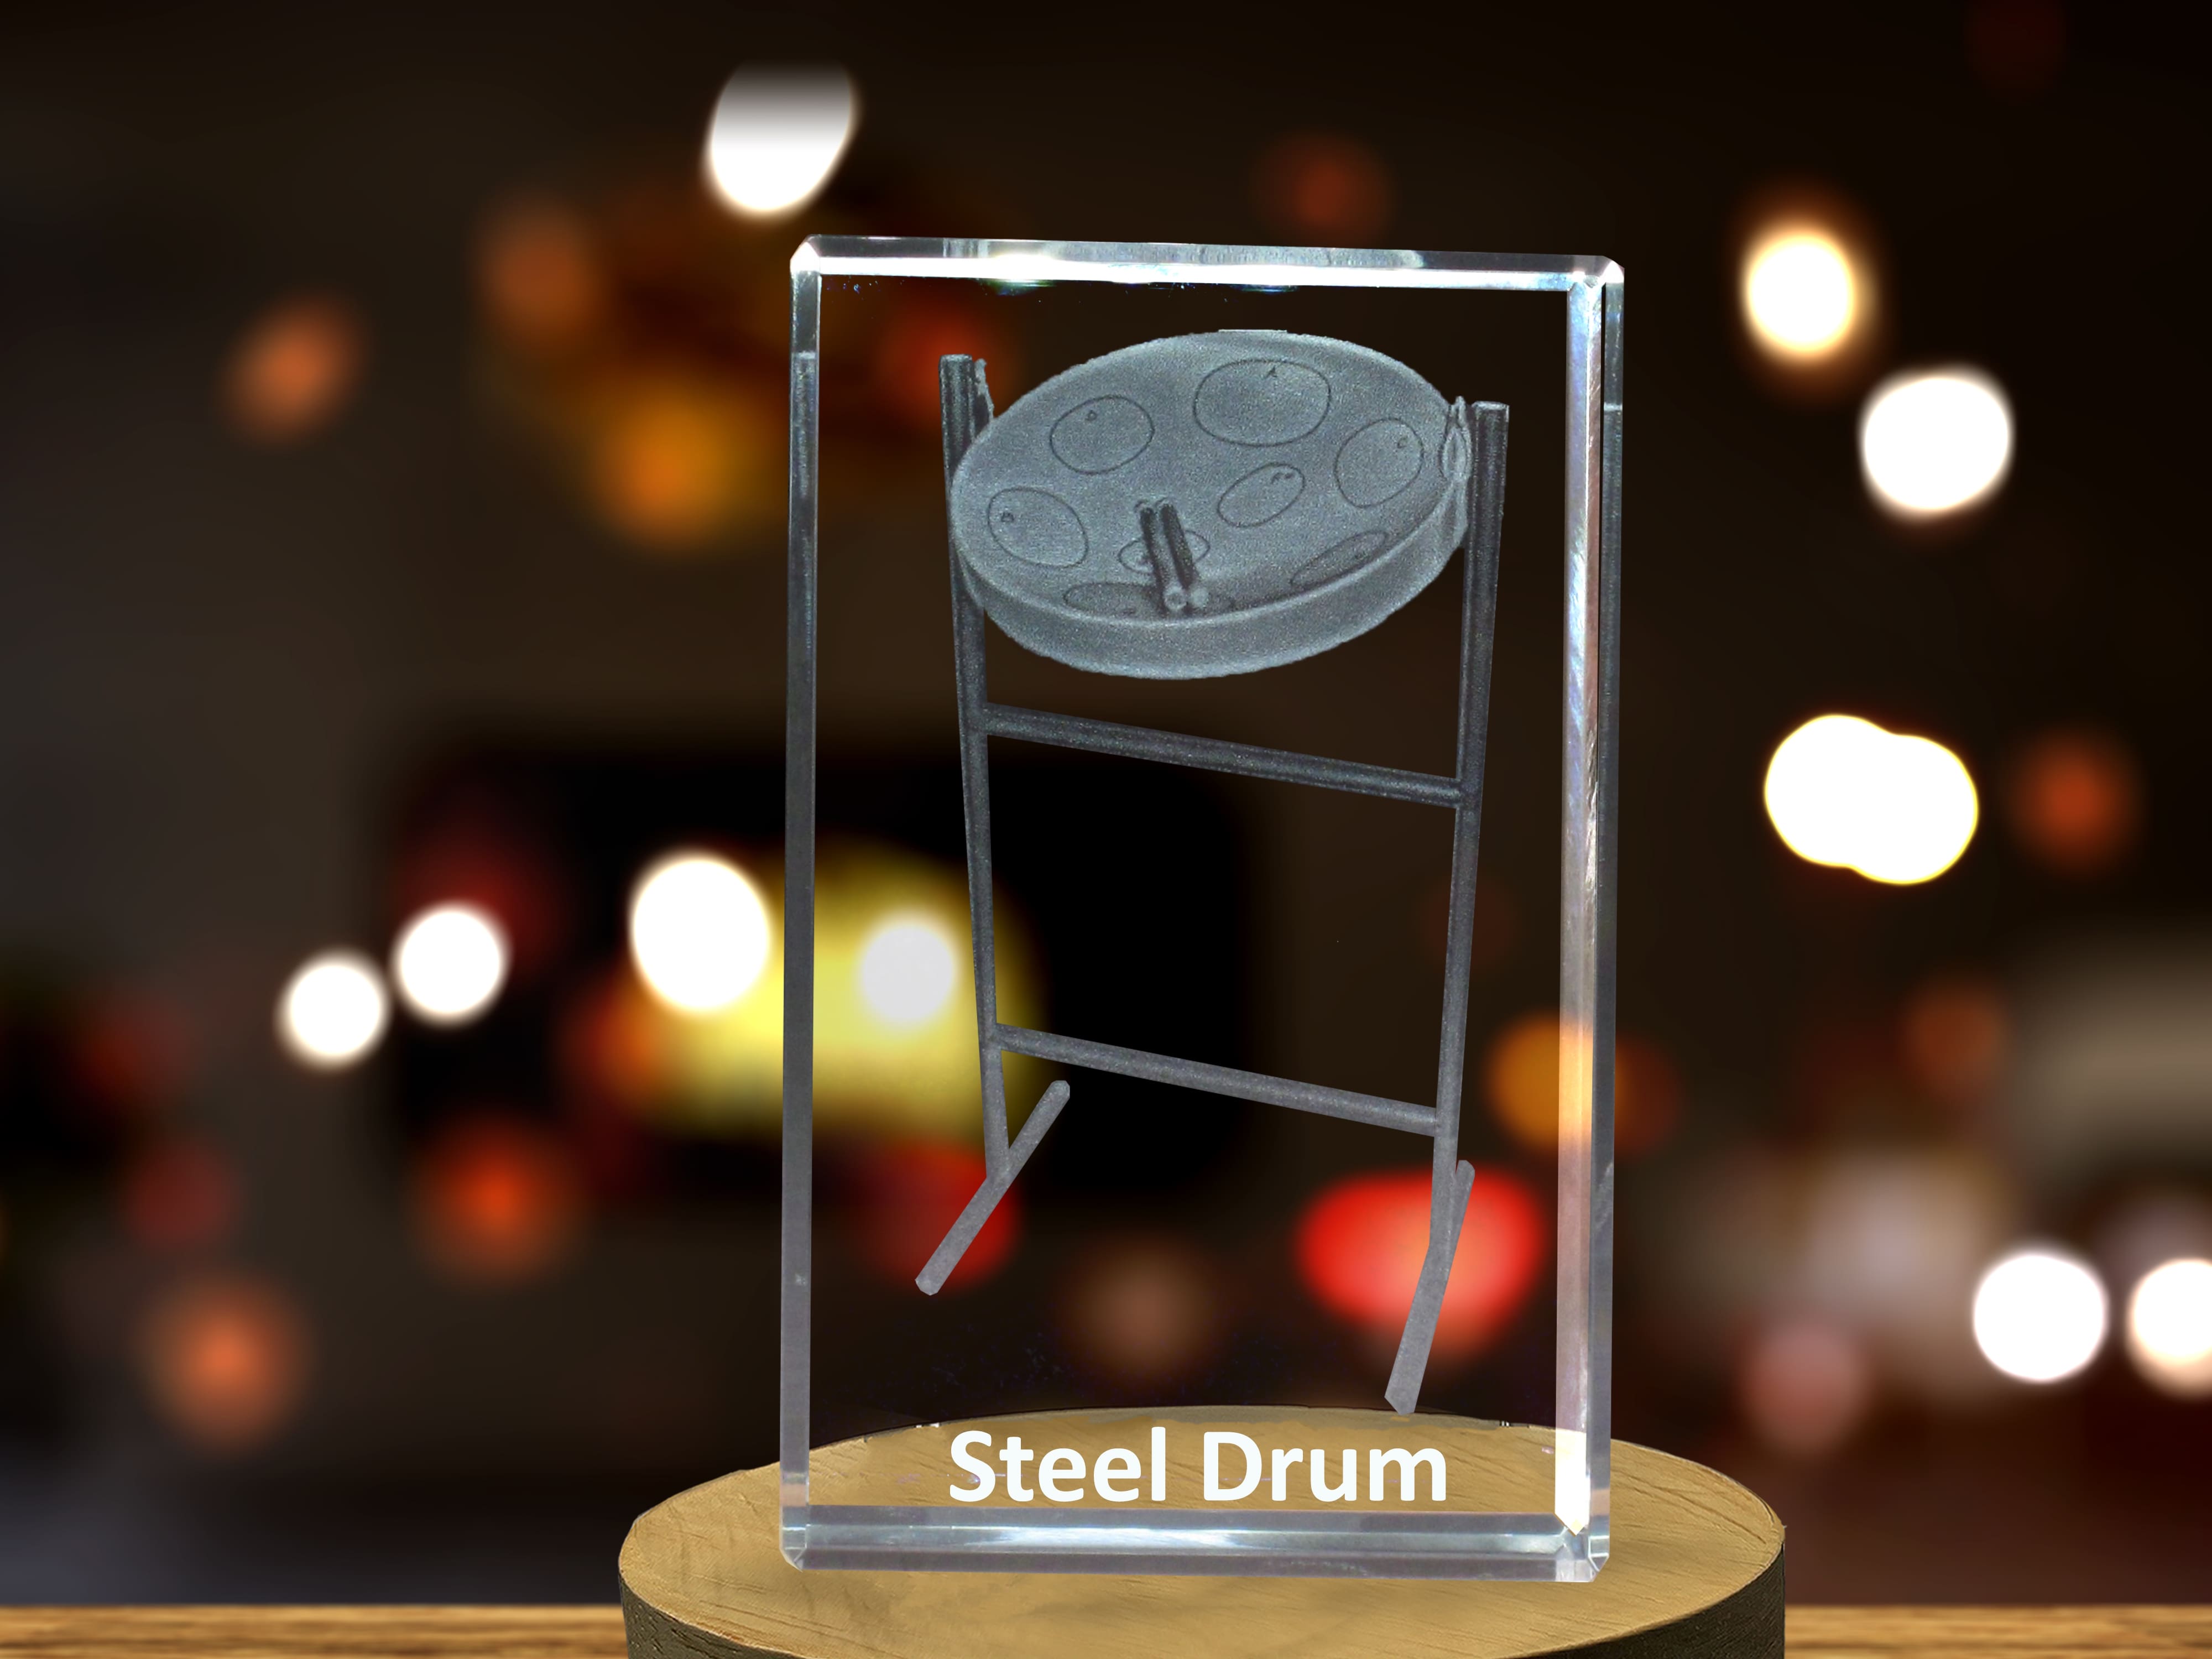 Steel Drum 3D Engraved Crystal 3D Engraved Crystal Keepsake/Gift/Decor/Collectible/Souvenir A&B Crystal Collection